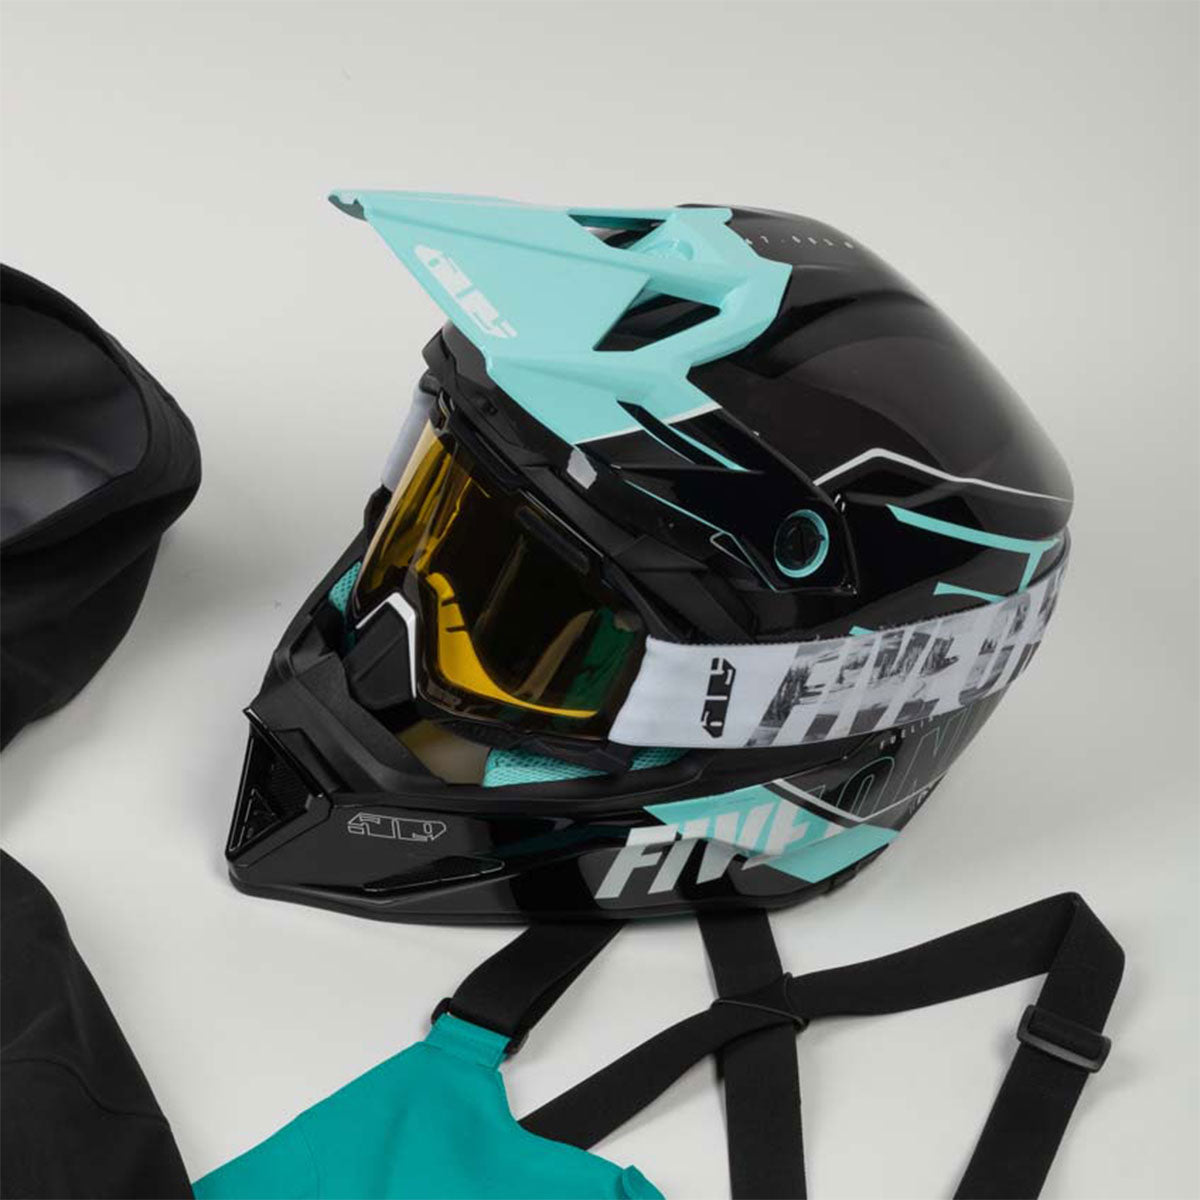 What are the Differences Between the Altitude and Altitude 2.0 Helmets?